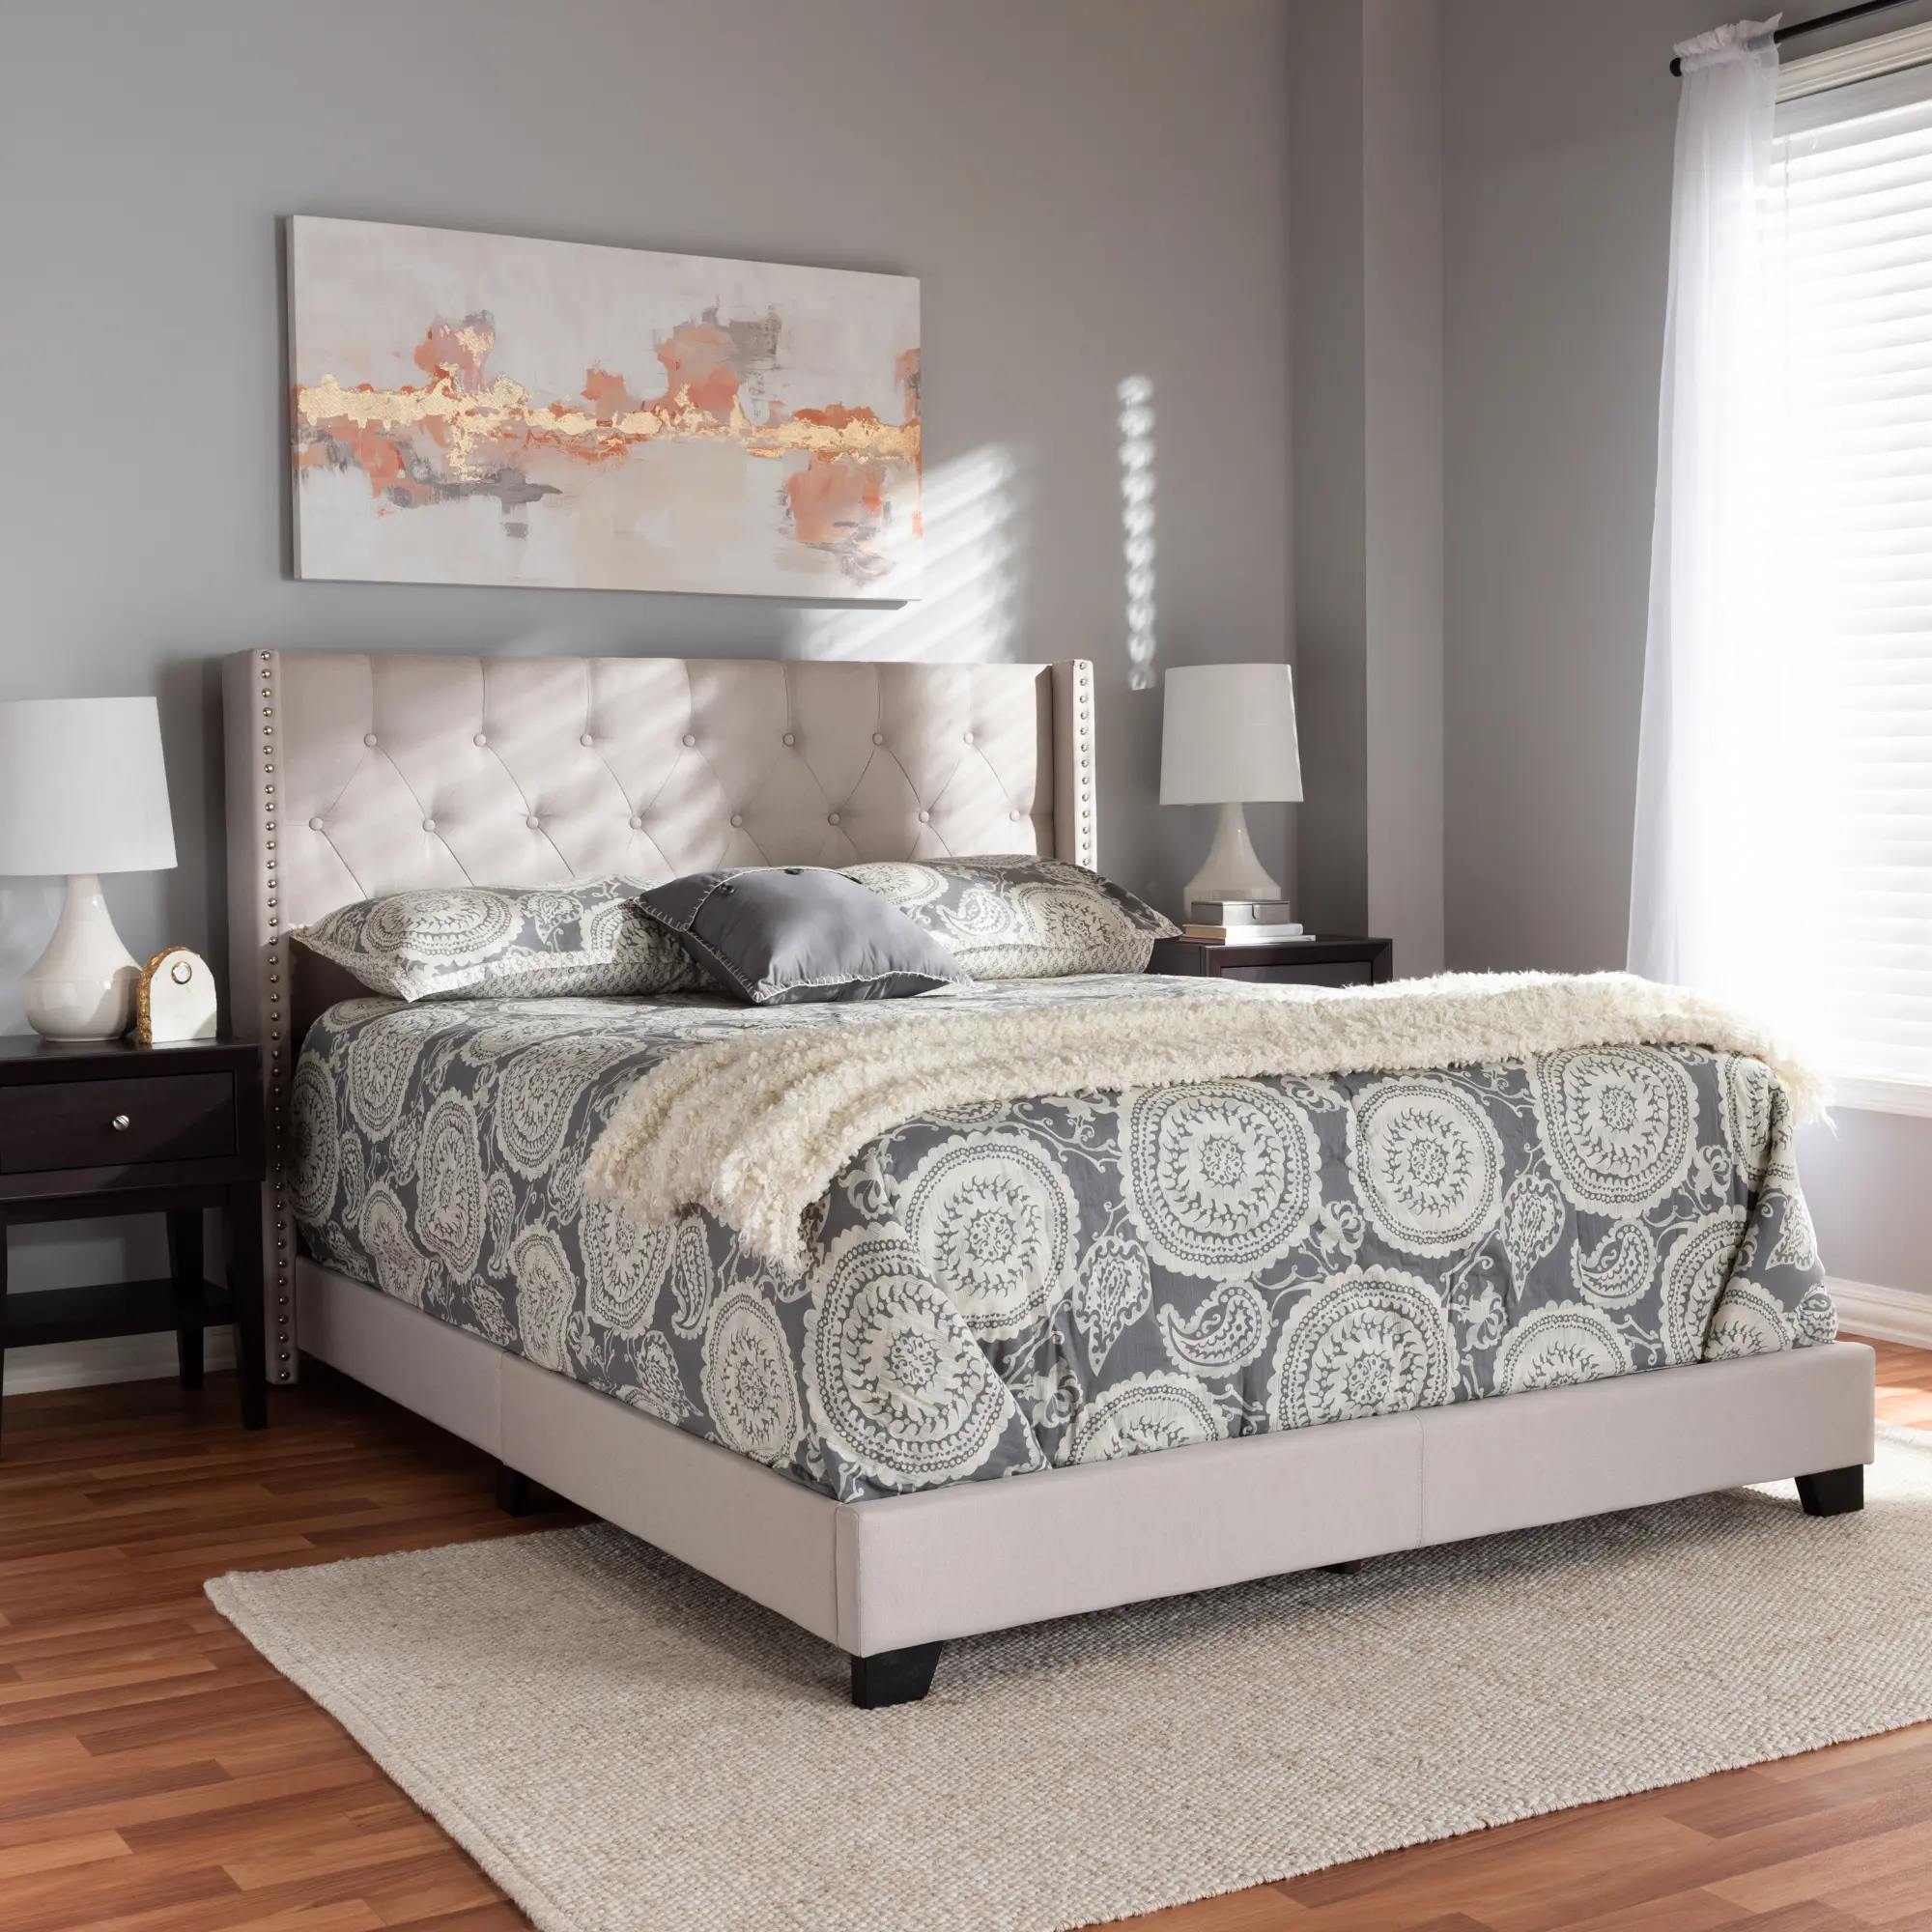 149-8945-RCW Contemporary Beige Upholstered Queen Bed - Westley sku 149-8945-RCW